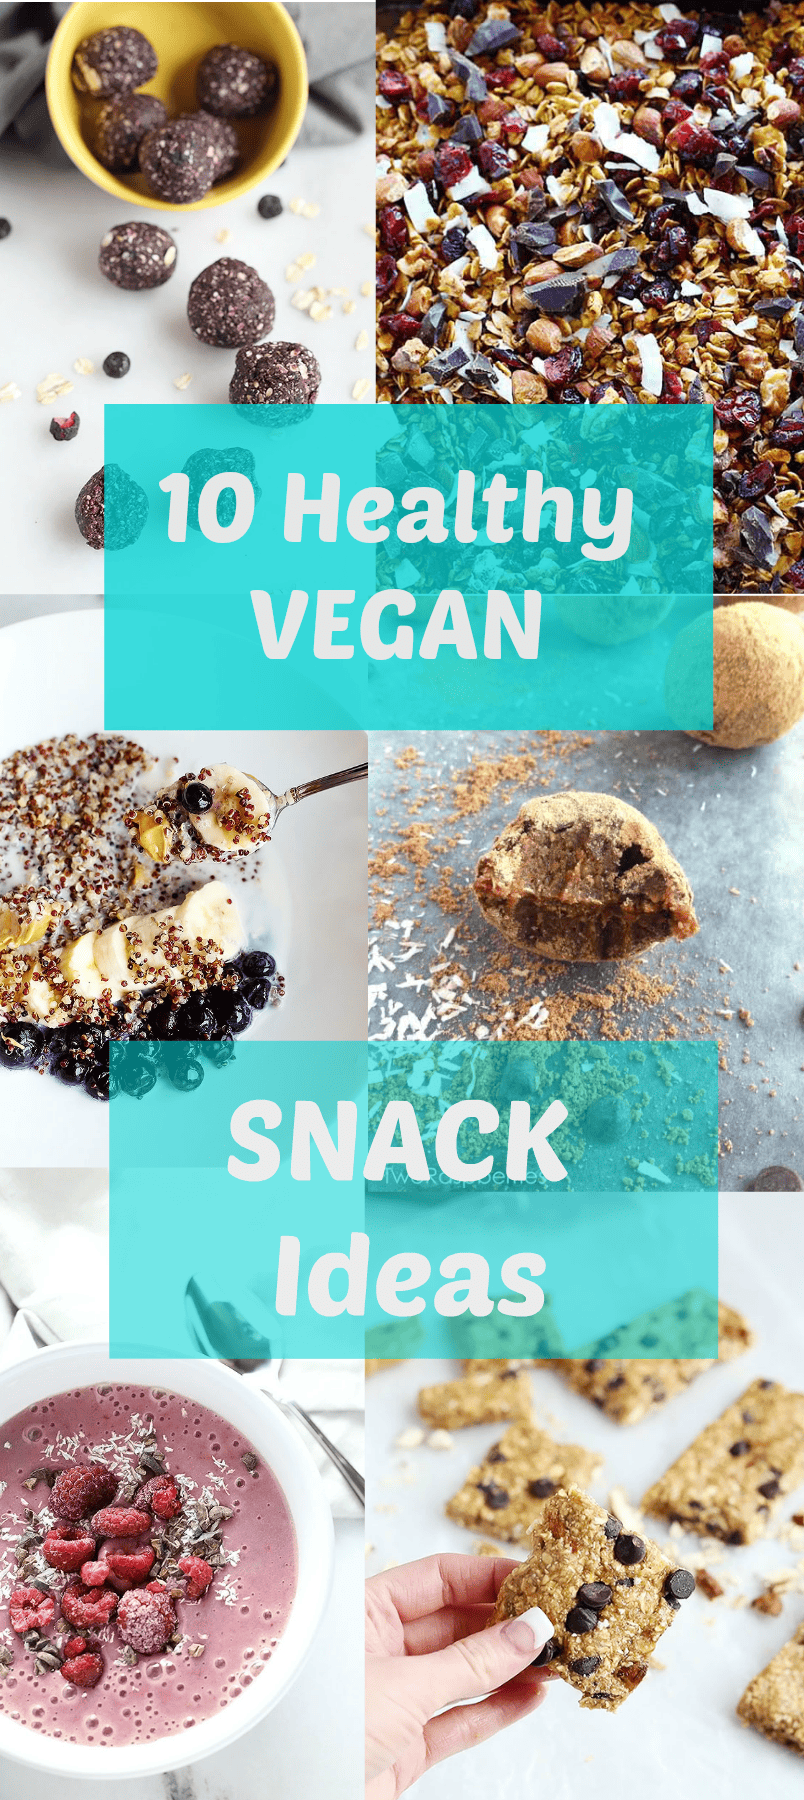 10 Healthy Vegan Snack Ideas , energy balls, energy bars, superfood quinoa bowl, smoothie bowls and many more vegan and gluten free snack ideas! / TwoRaspberries.com